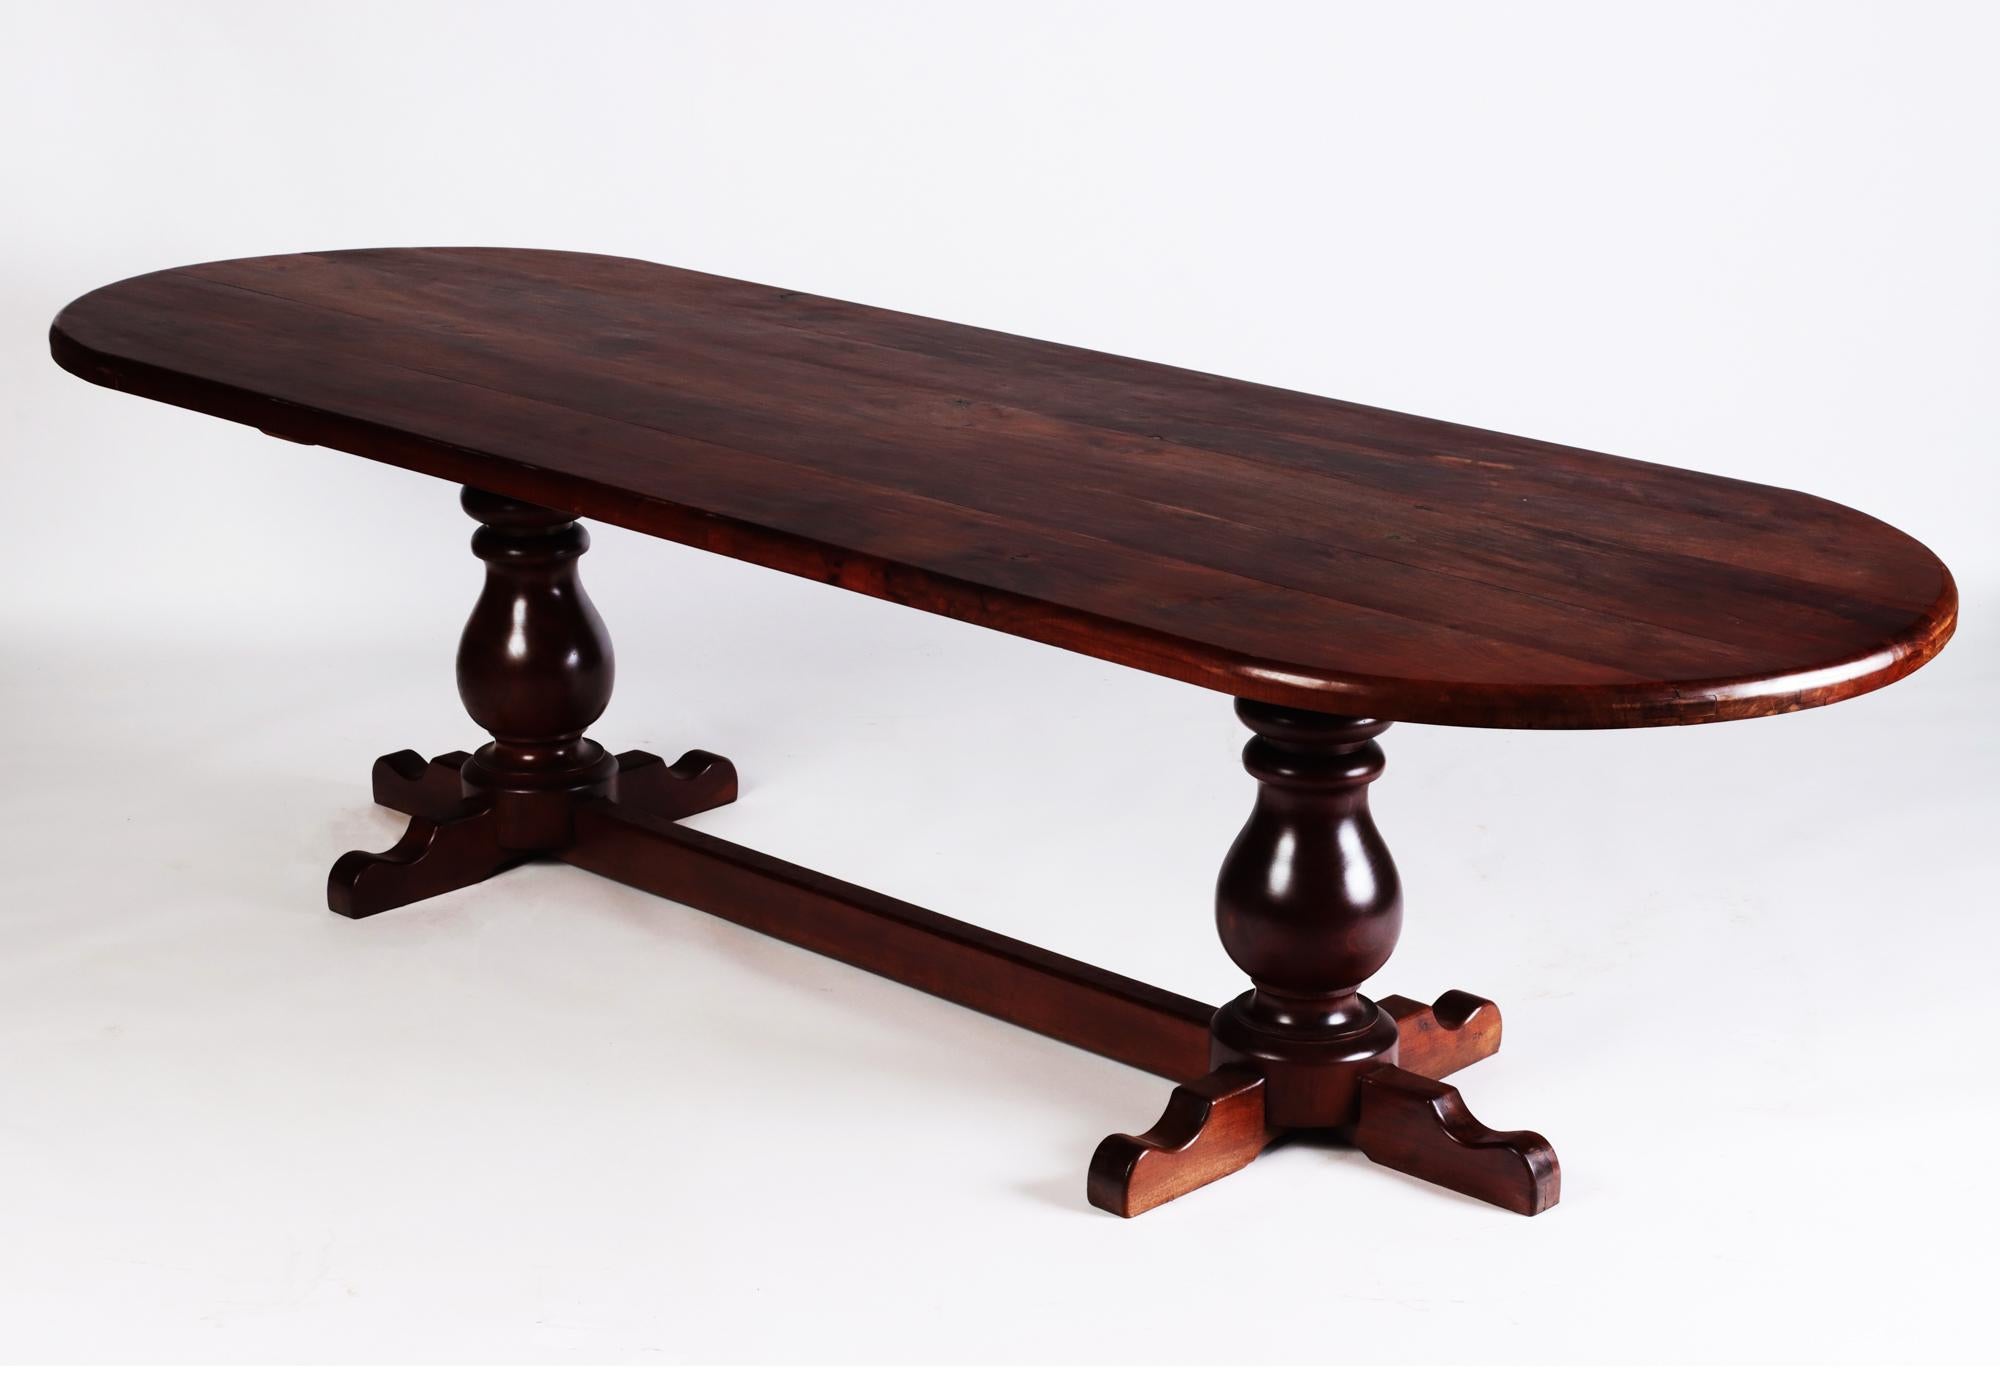 A large slab top oval shape Brazilian trestle table circa 1960. The two turned legs are joined with a cross stretcher.